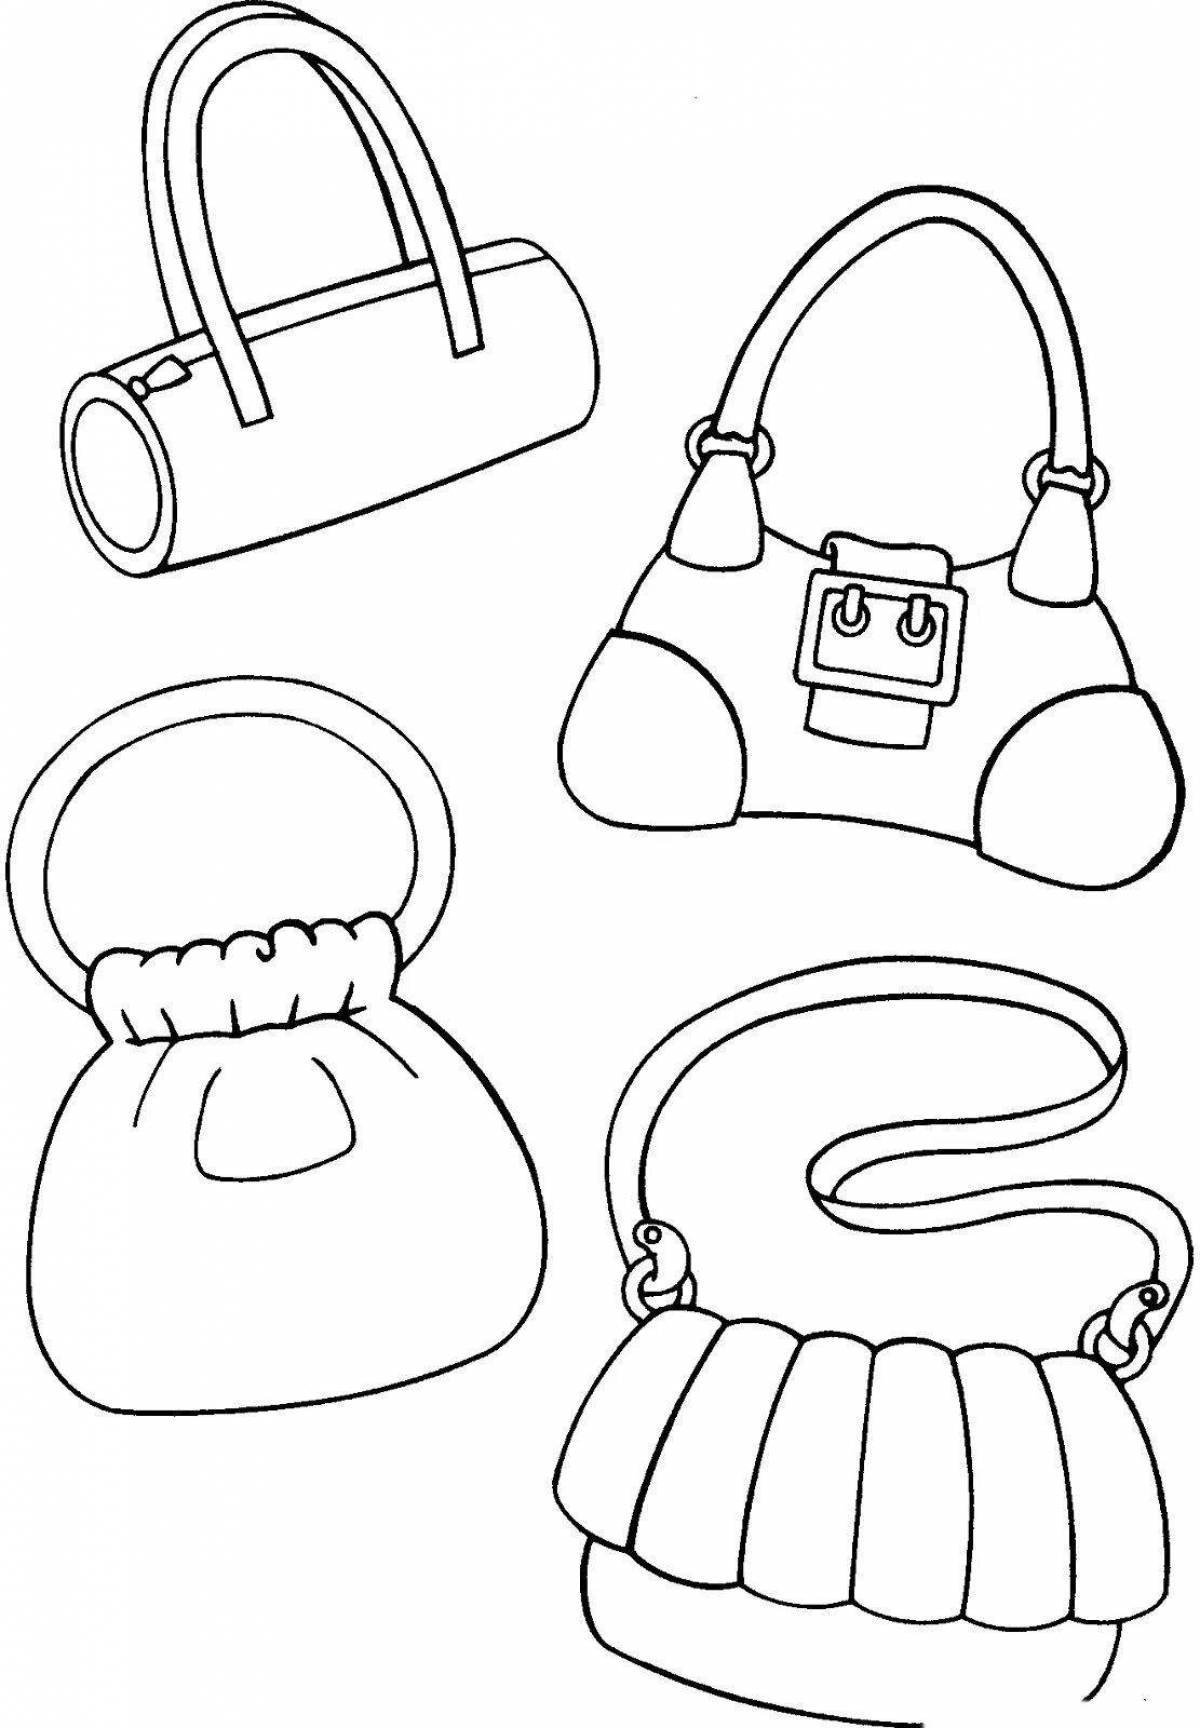 Coloring page exquisite handbag for girls